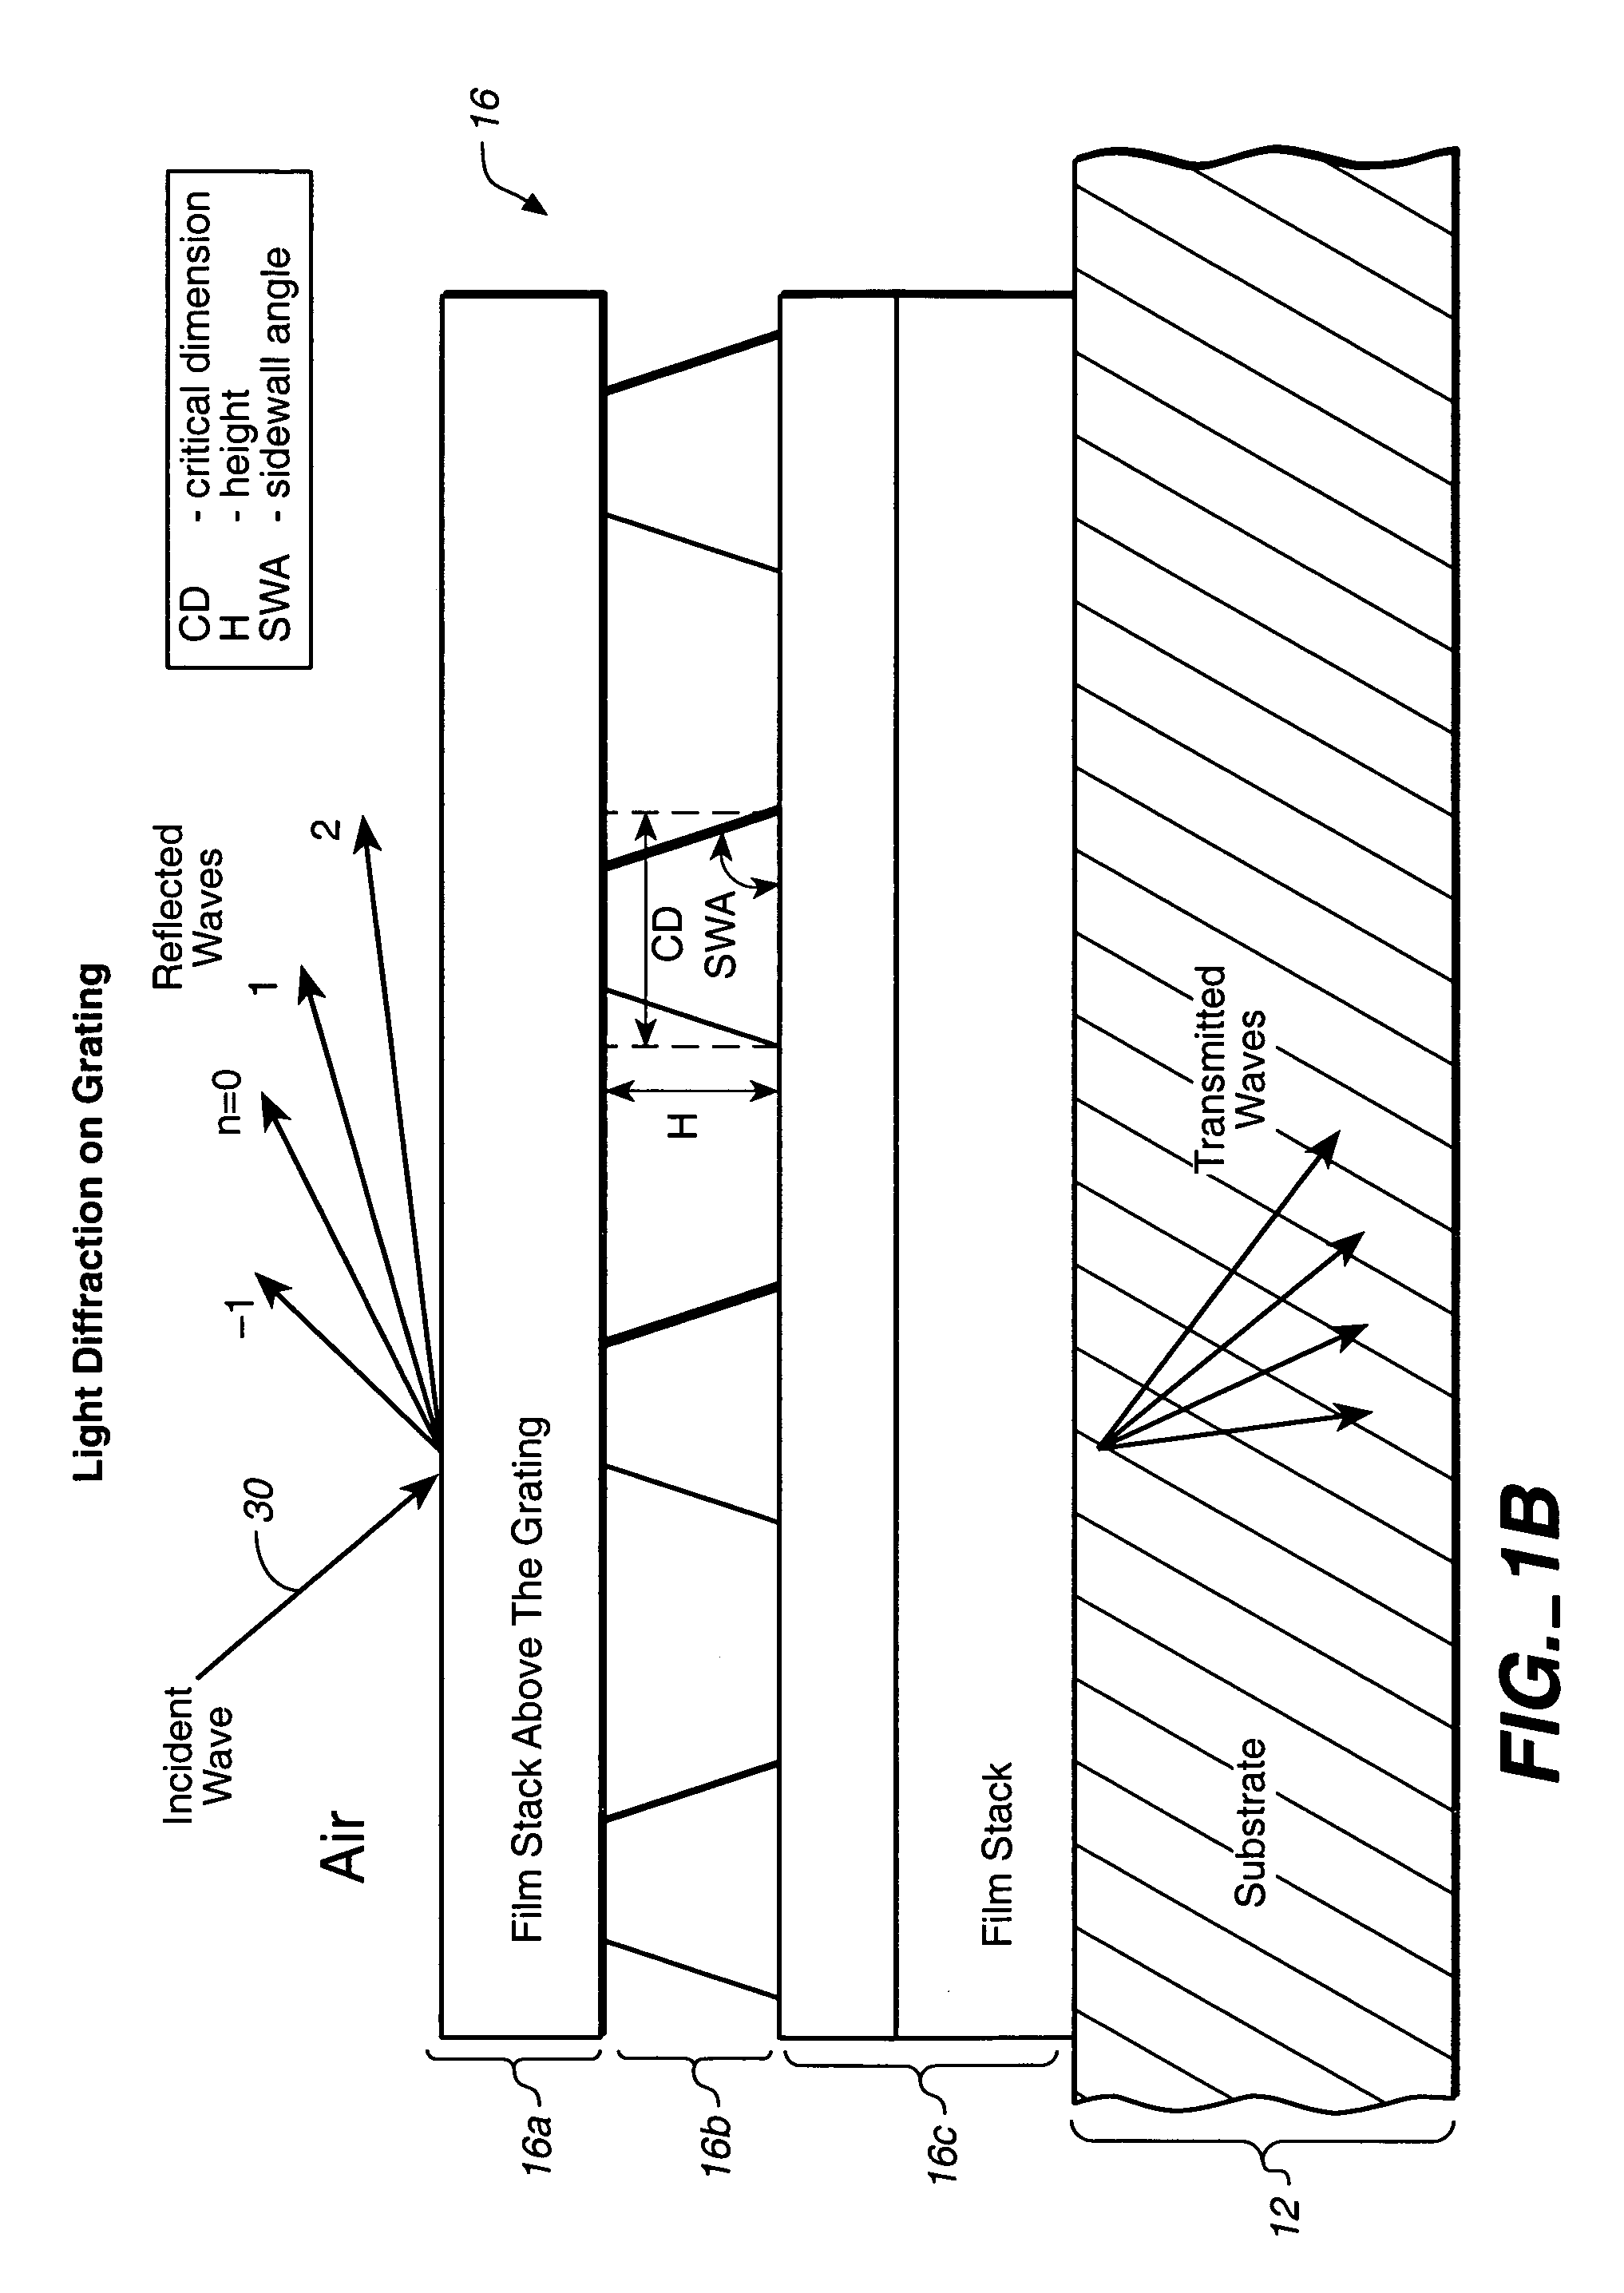 Parametric profiling using optical spectroscopic systems